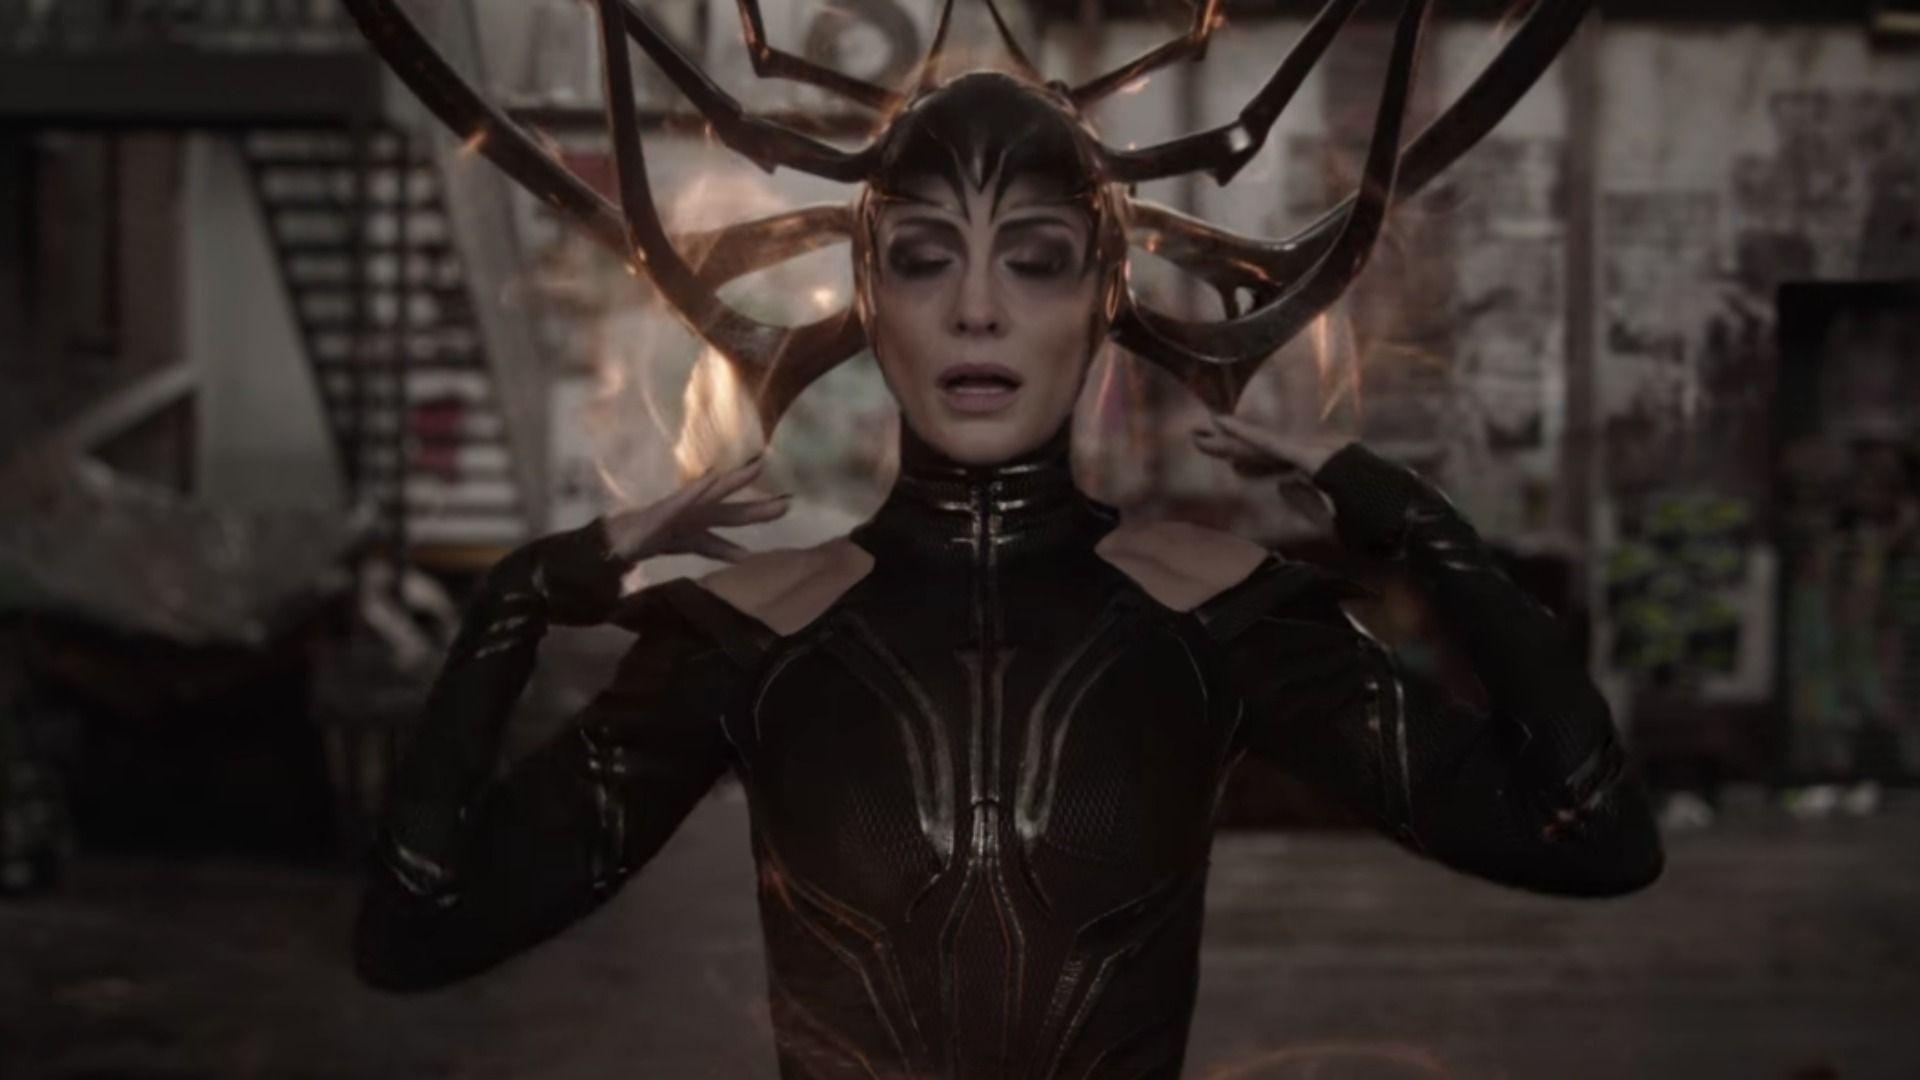 Is Hela's Role in the MCU More Important than We Think?